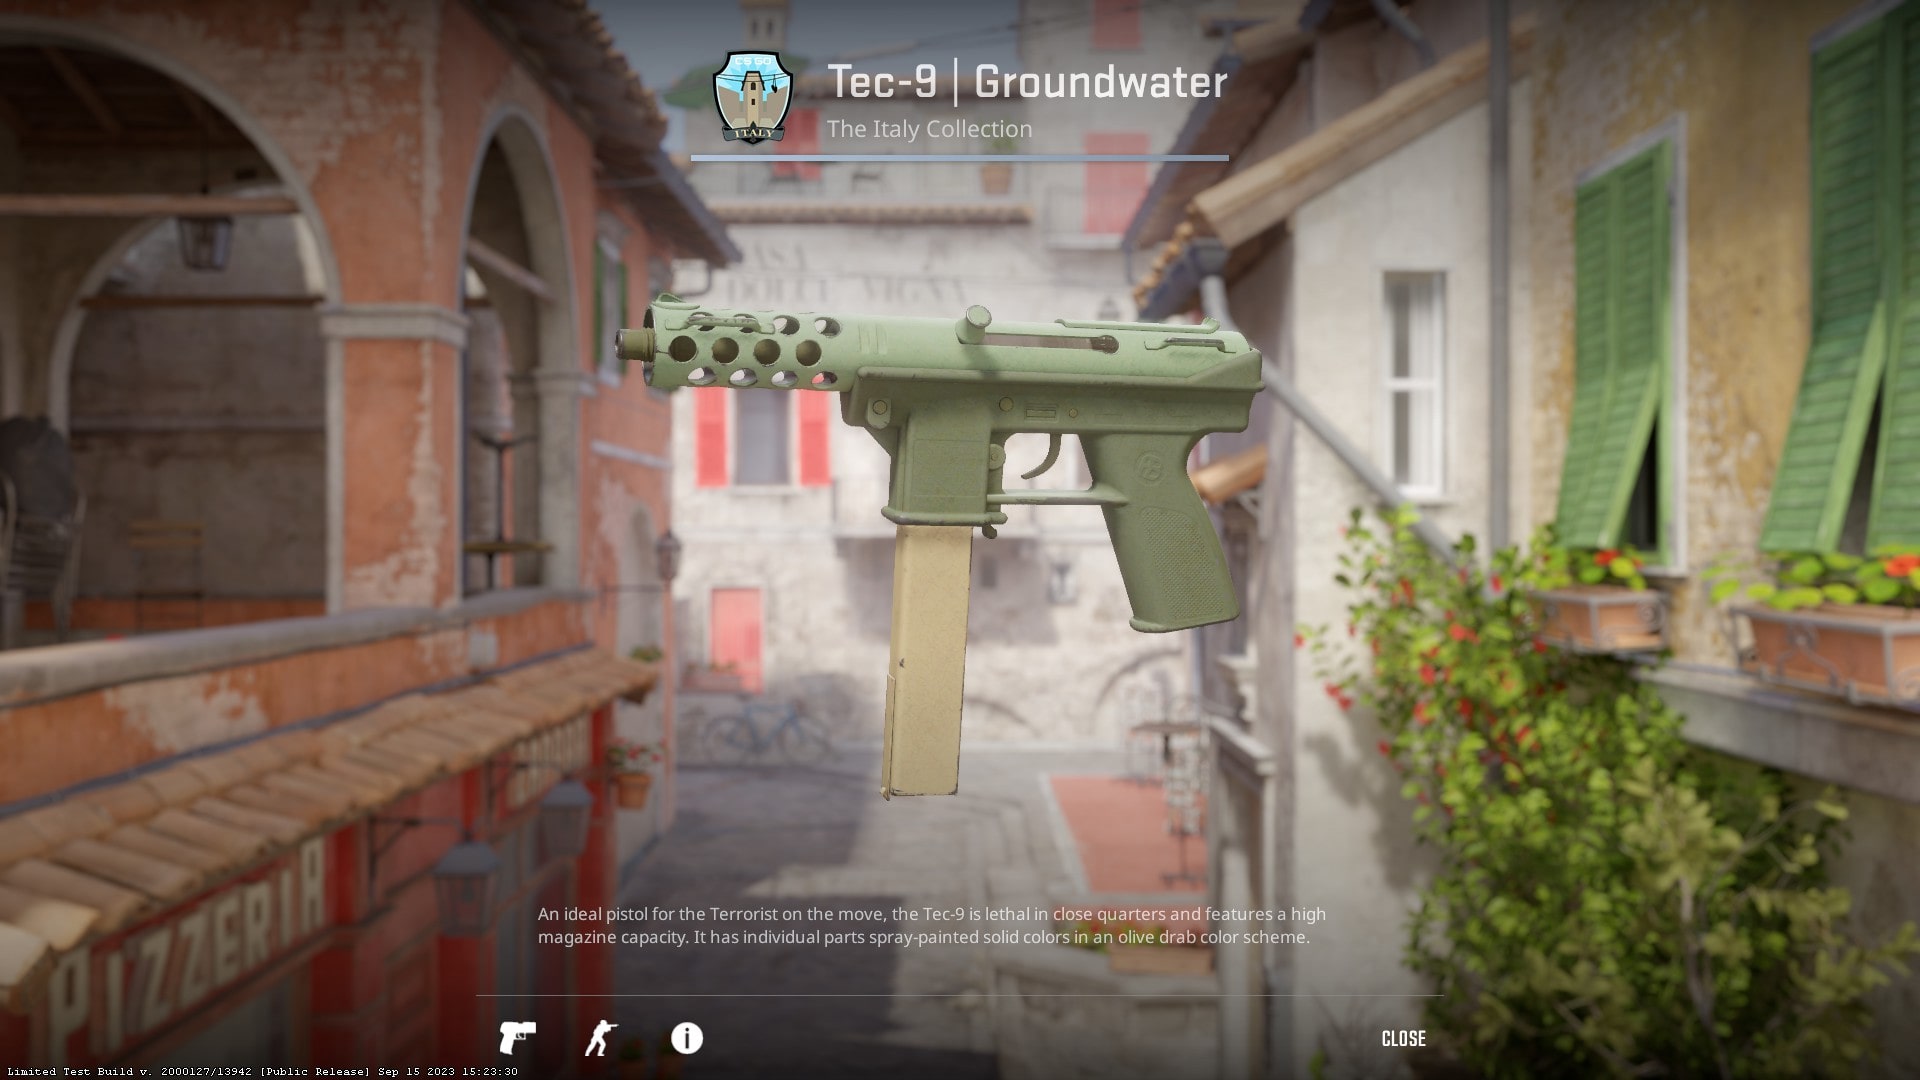 Cheapest Tec-9 Skins - Groundwater